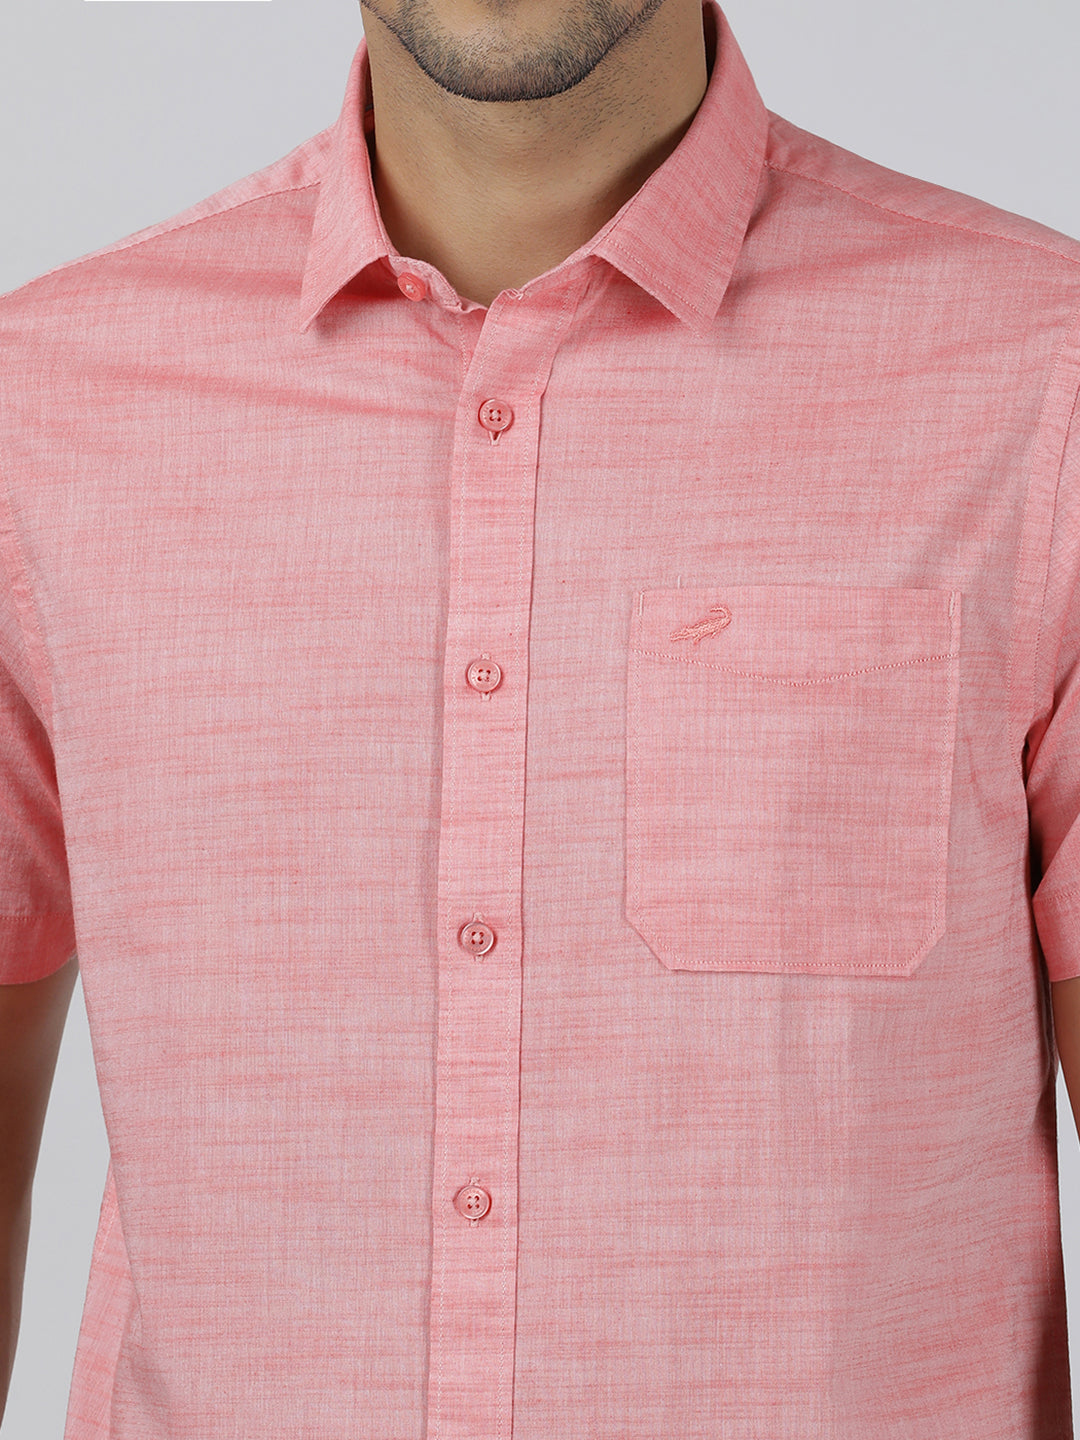 Casual Pink Half Sleeve Regular Fit Solid Shirt with Collar for Men